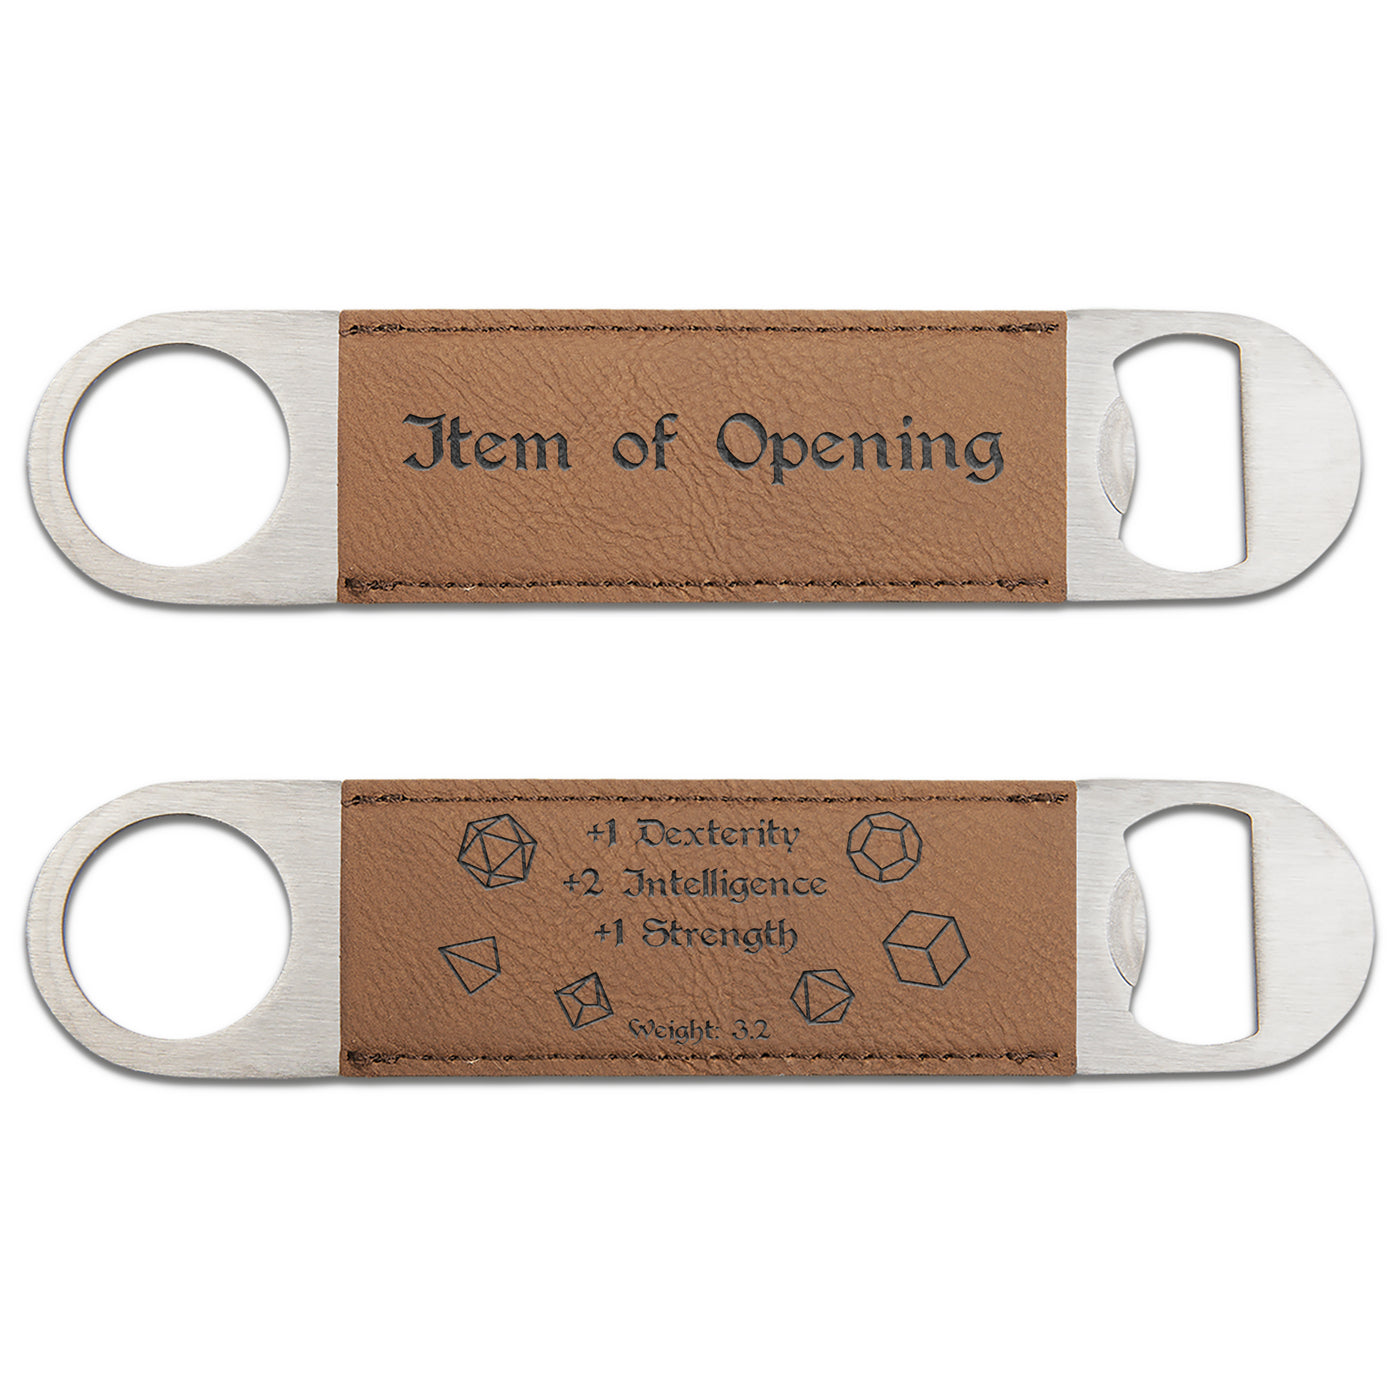 Dungeons and Dragons Item of Opening Bottle Opener | DnD Gifts Men | DnD Accessories | Dungeon Master Gifts | DnD Stuff | D&D Gifts